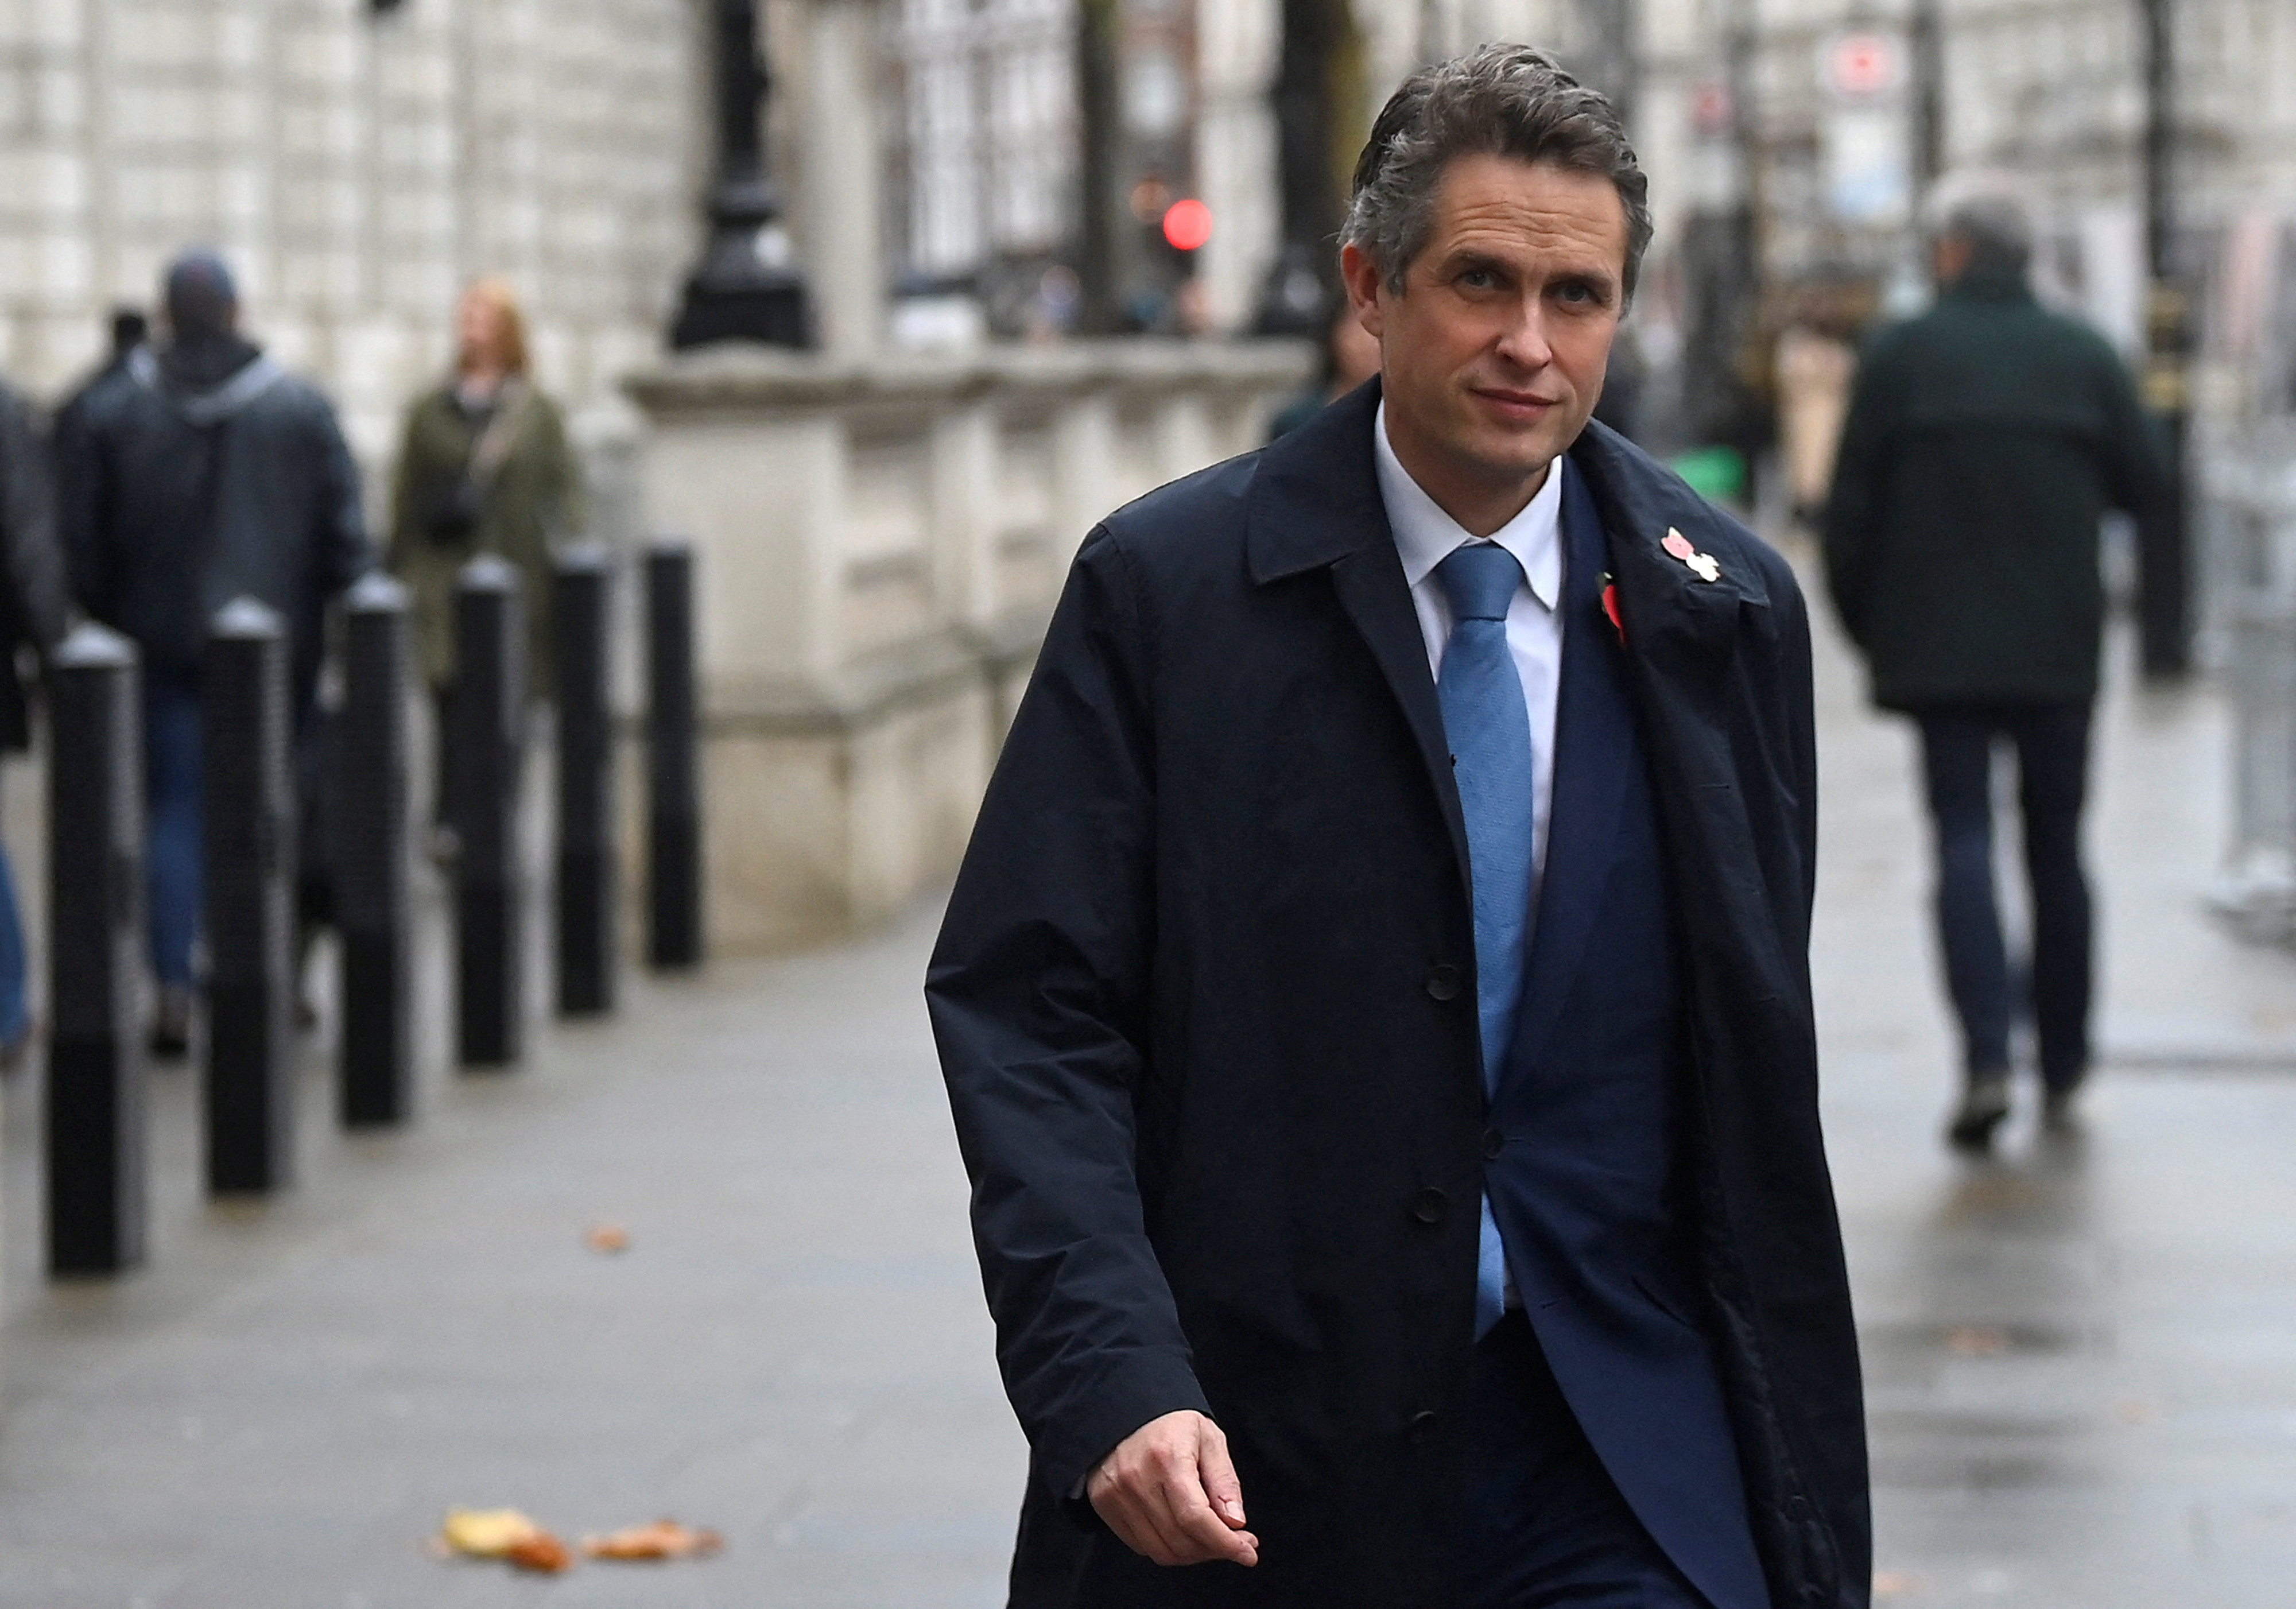 British Minister of State without portfolio Williamson walks in London